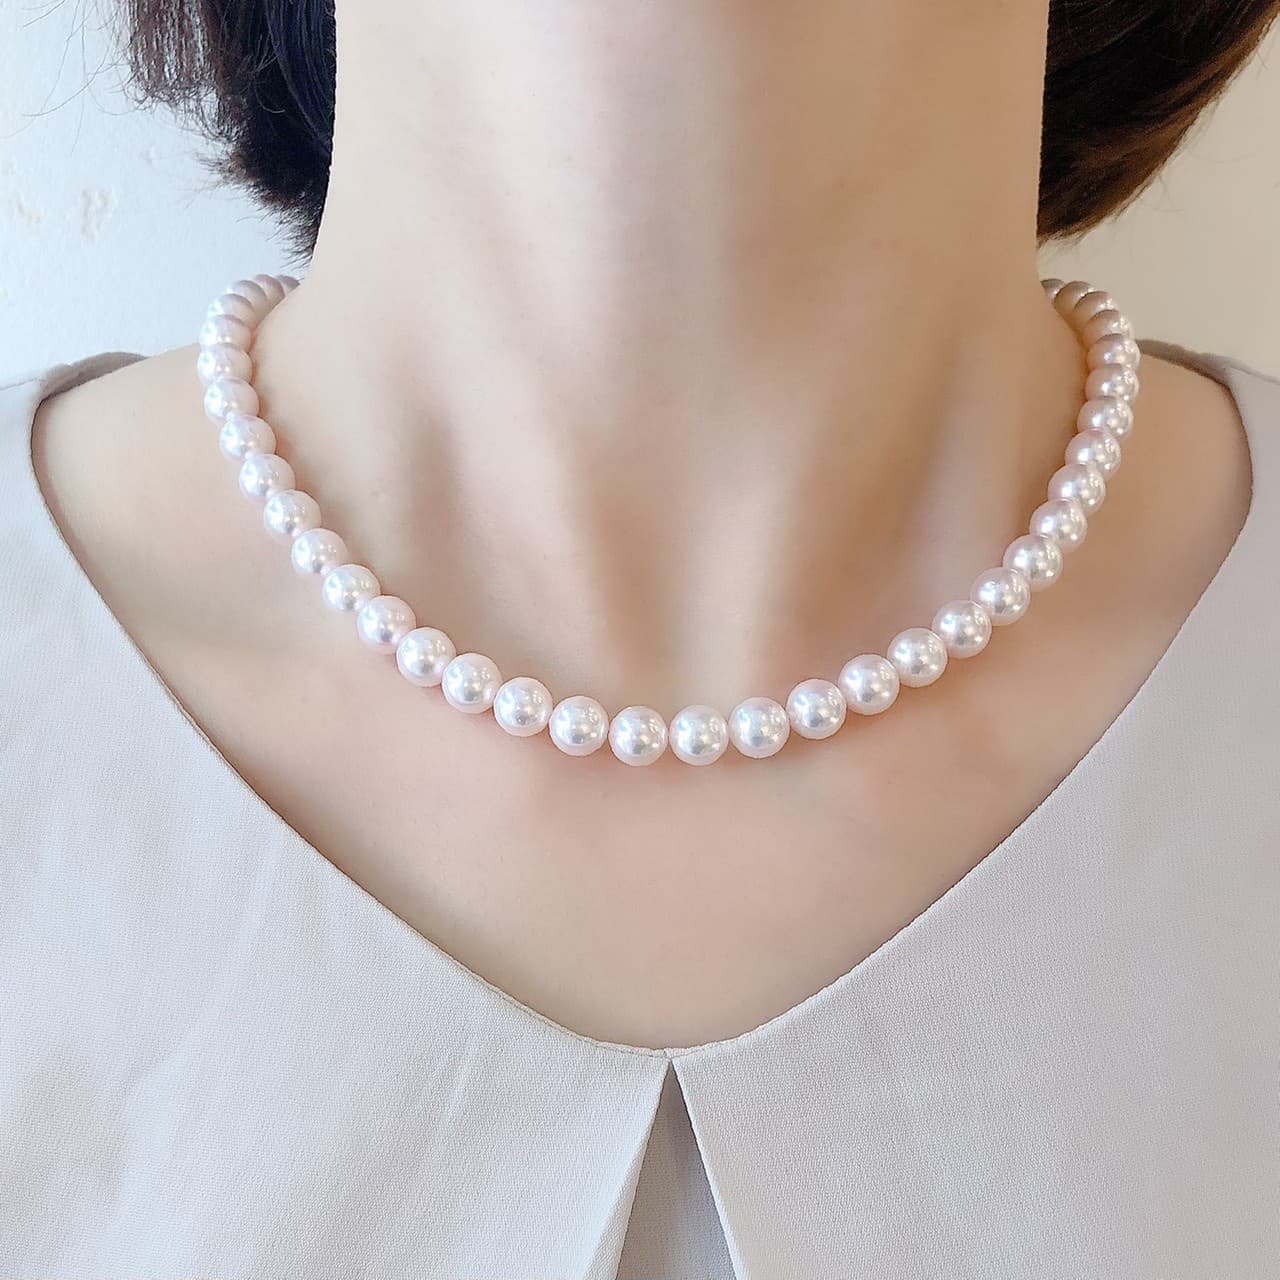 Akoya pearl necklace & pearl earrings set【L】/アコヤ真珠ネックレス＆イヤリングセット Mサイズ-3